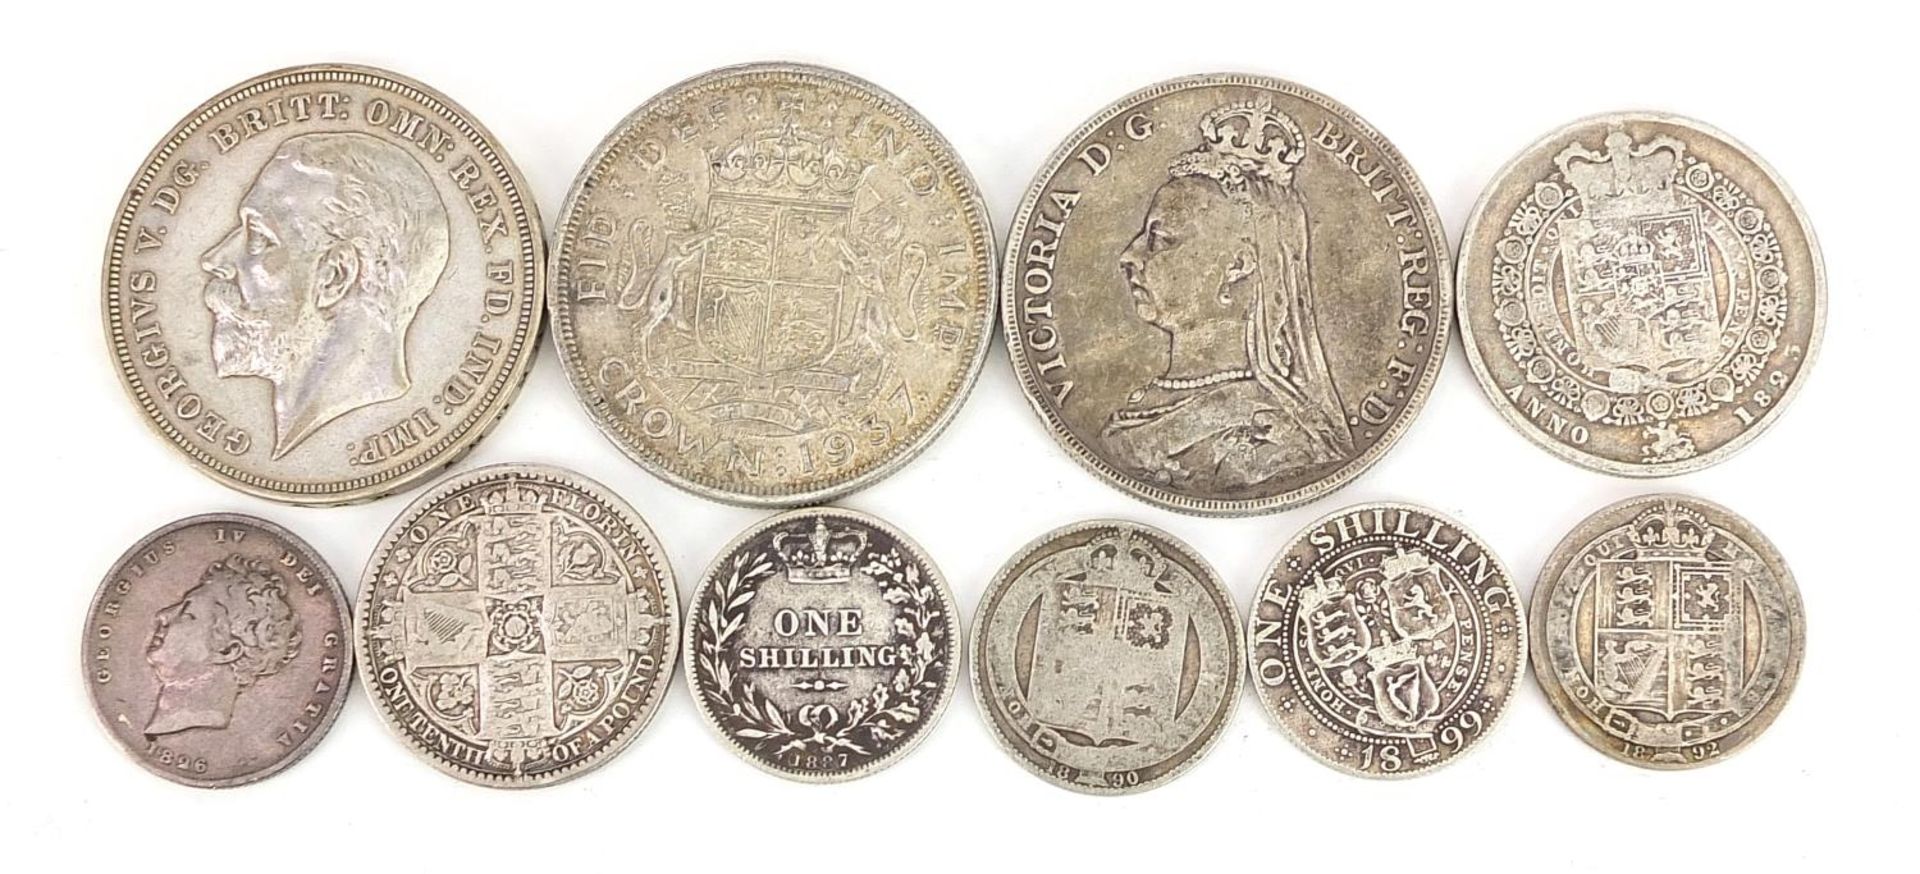 William IV and later British coinage including 1888 crown, Gothic florin and George IV 1826